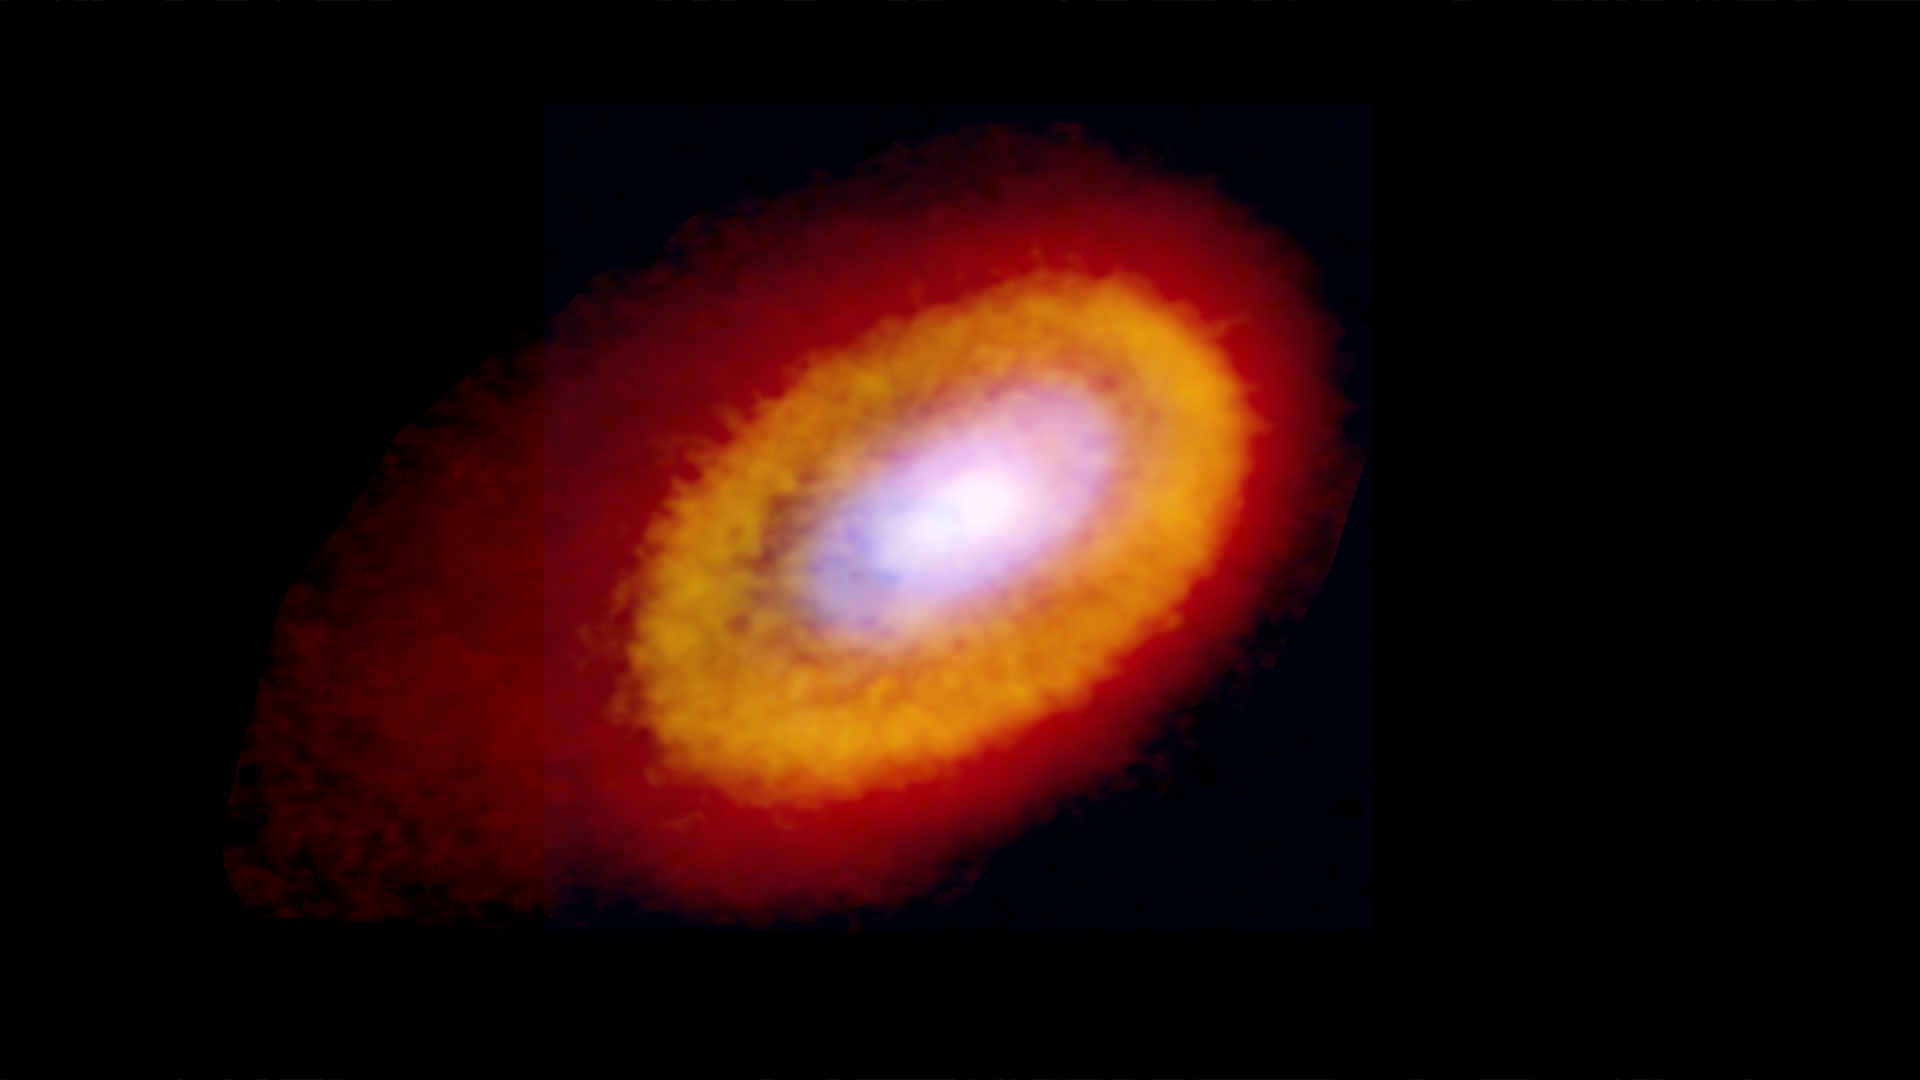 Multiple molecular tracers helped scientists to better understand the gases present in the disk surrounding Elias 2-27. Visible in this composite are the 0.87mm dust continuum data (blue), C18O emission (yellow), and 13CO emission (red). Credit: Teresa Paneque-Carreño/ Bill Saxton, NRAO/AUI/NSF